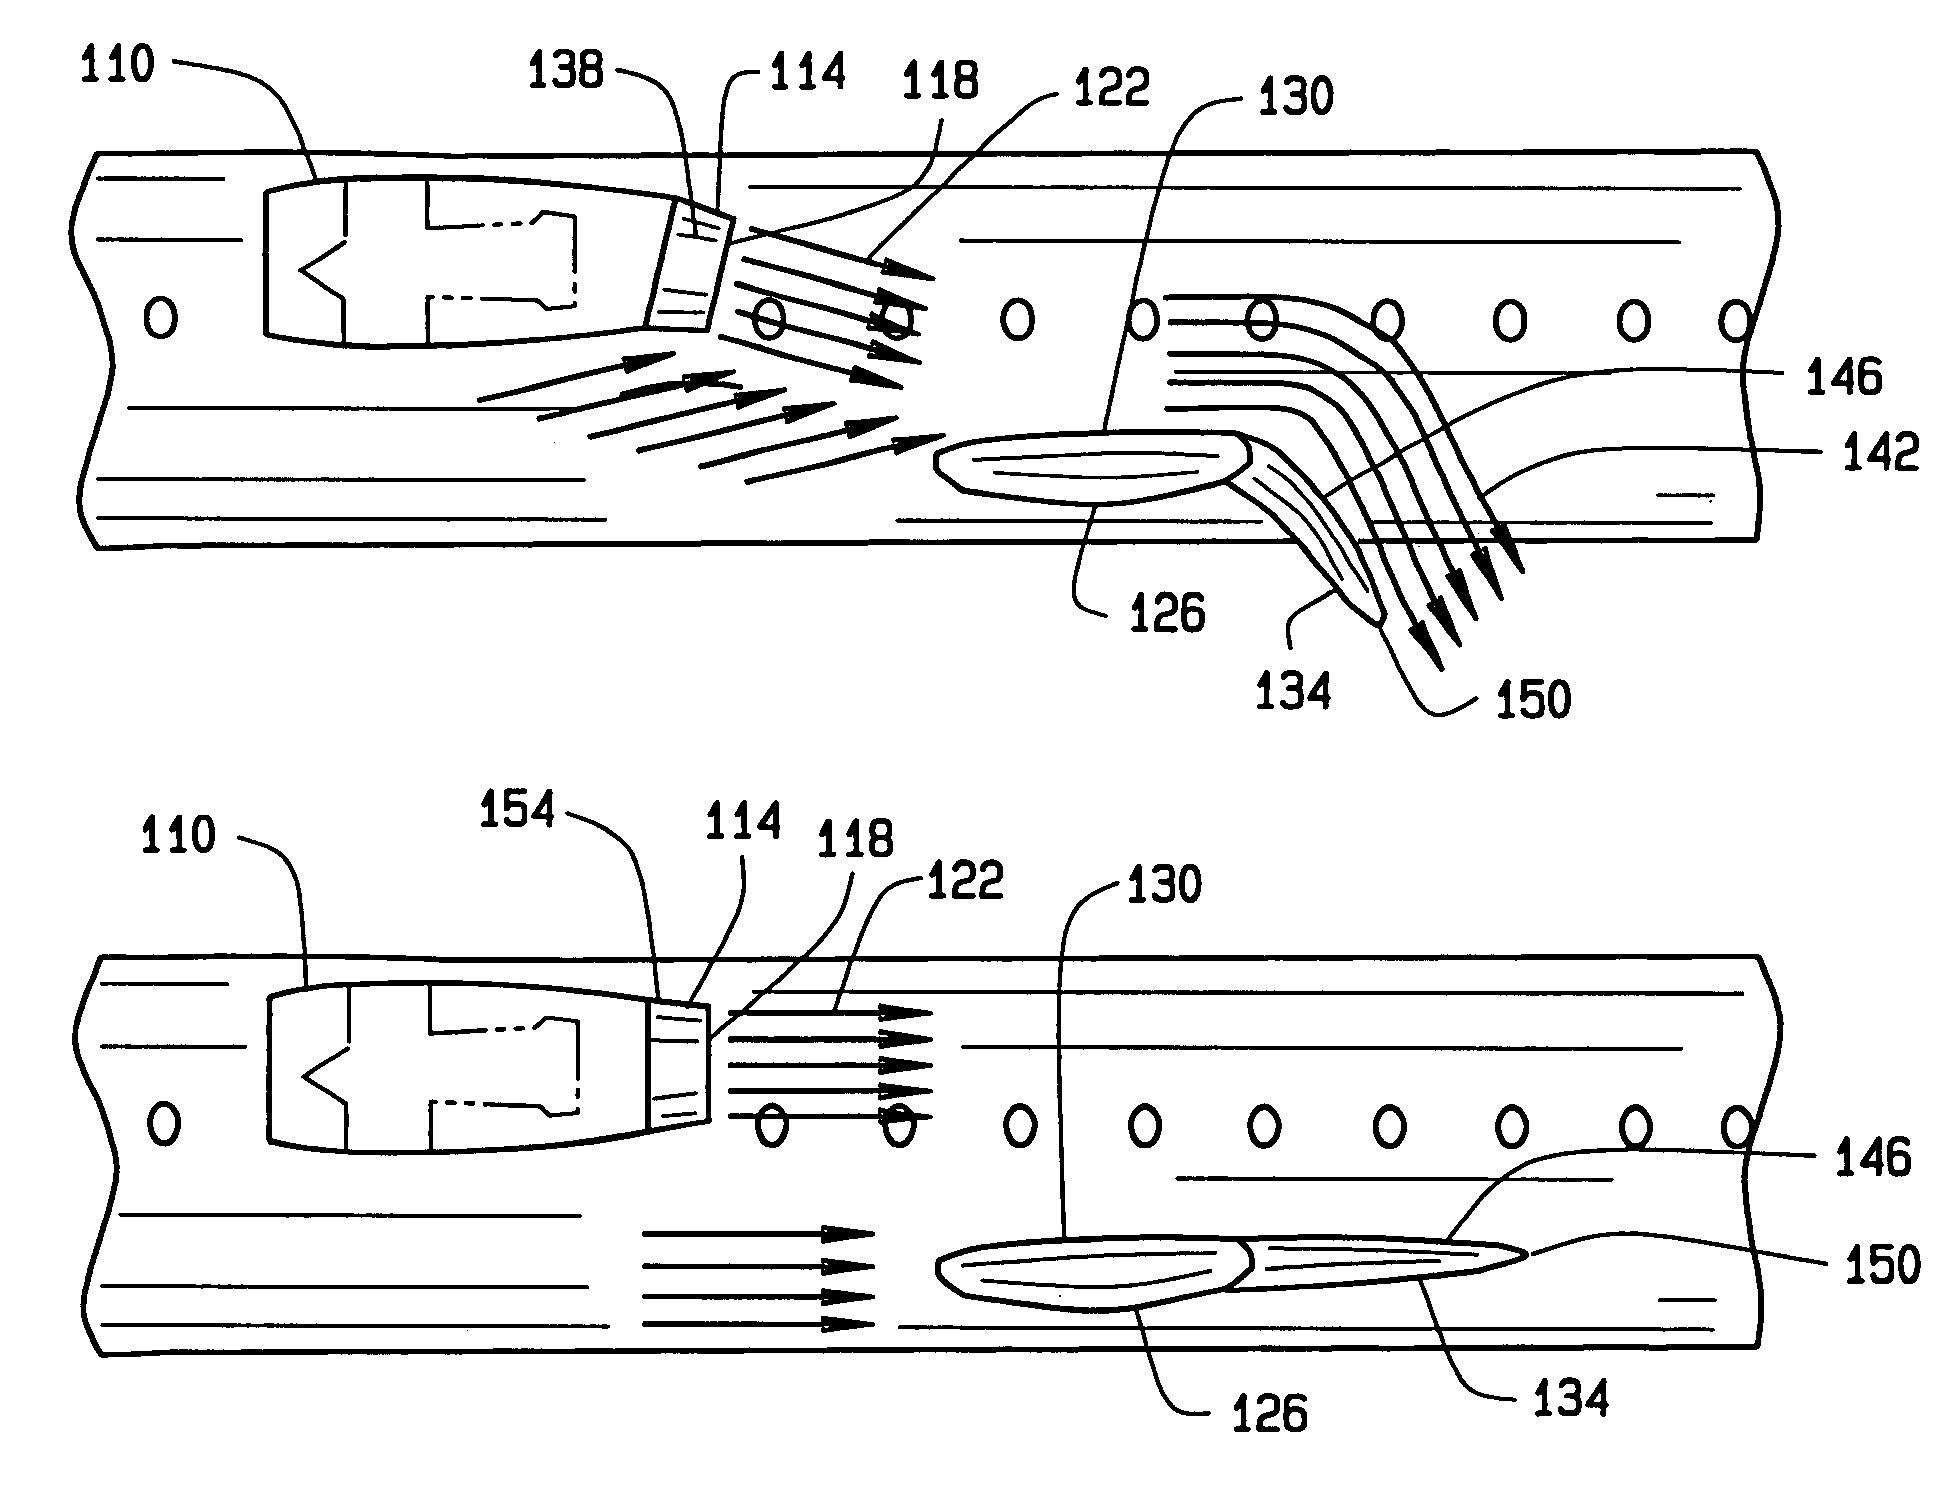 Aircraft with thrust vectoring for switchably providing upper surface blowing